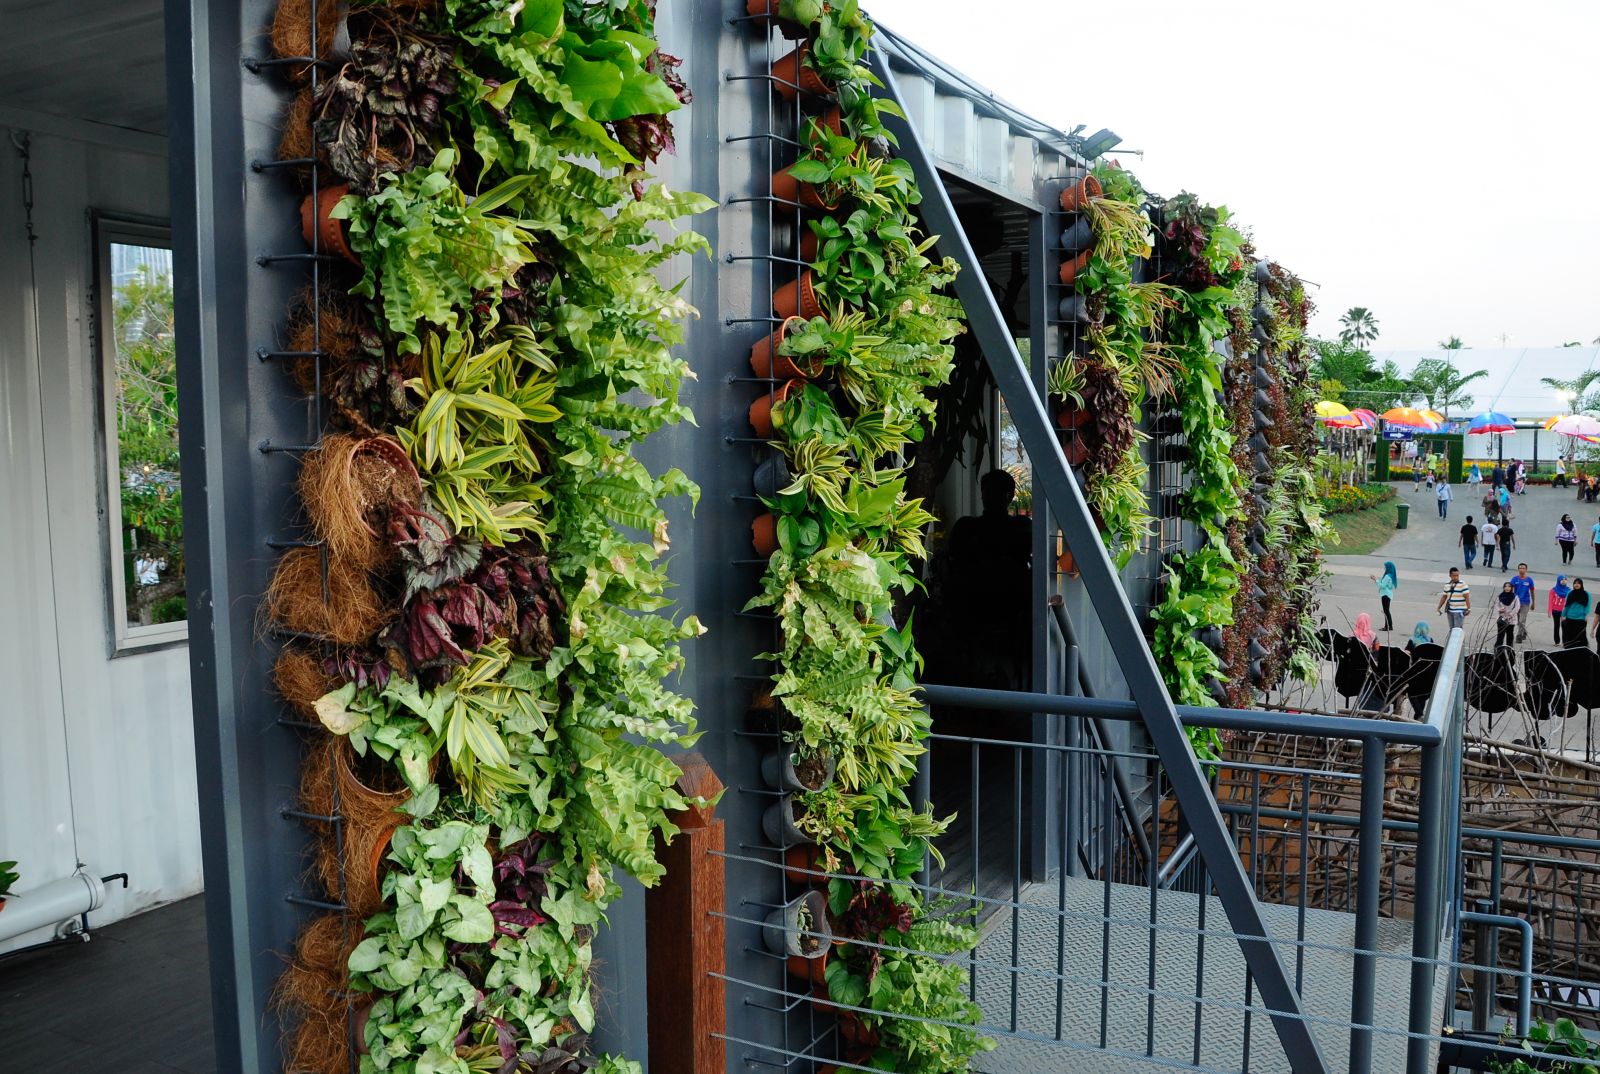 Flowers and vegetables hung as a vertical garden in plastic pots